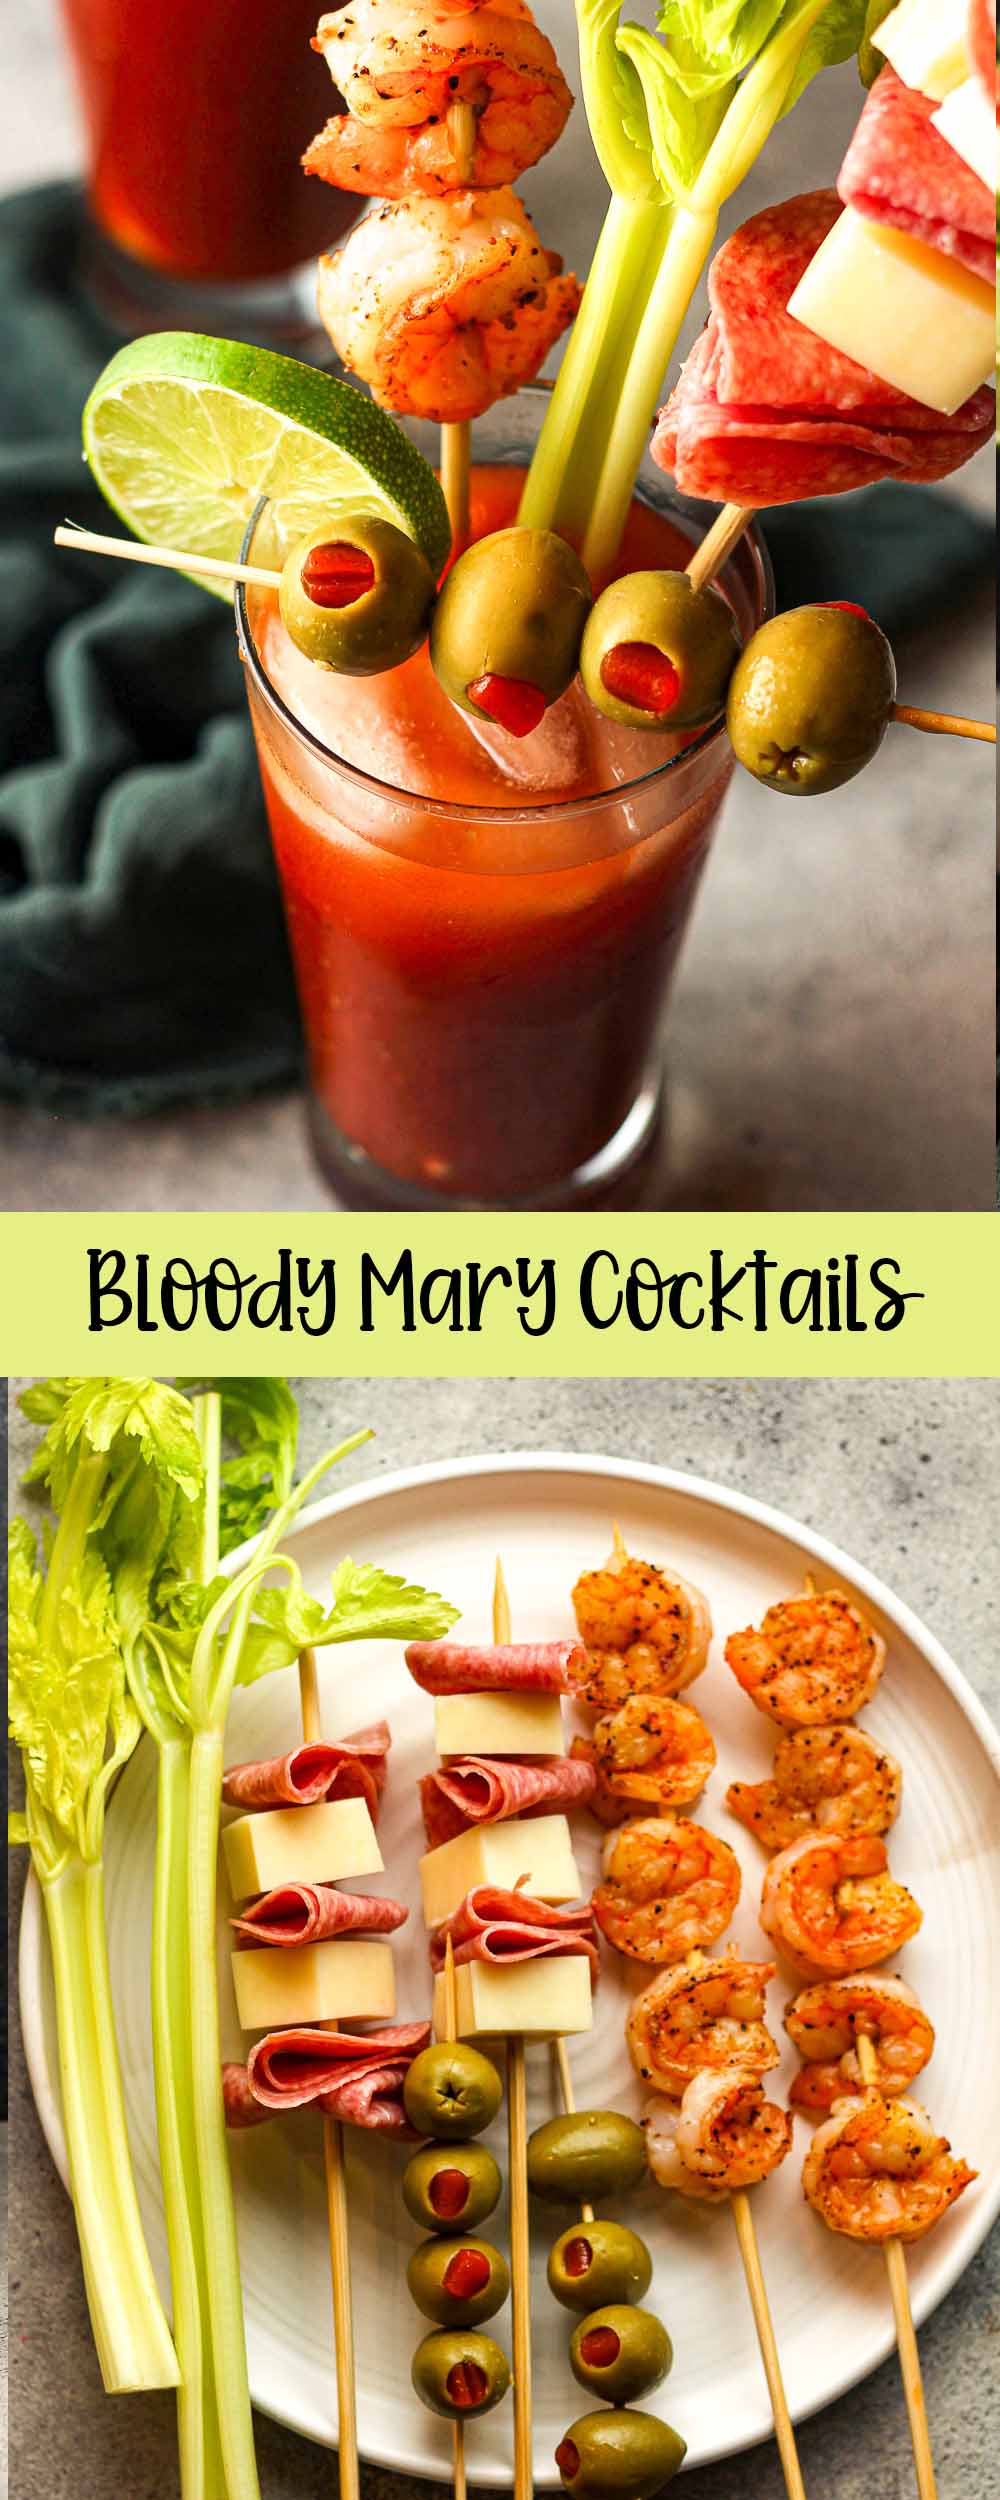 A collage of - a overhead view of a loaded Bloody Mary and a plate of garnishes.